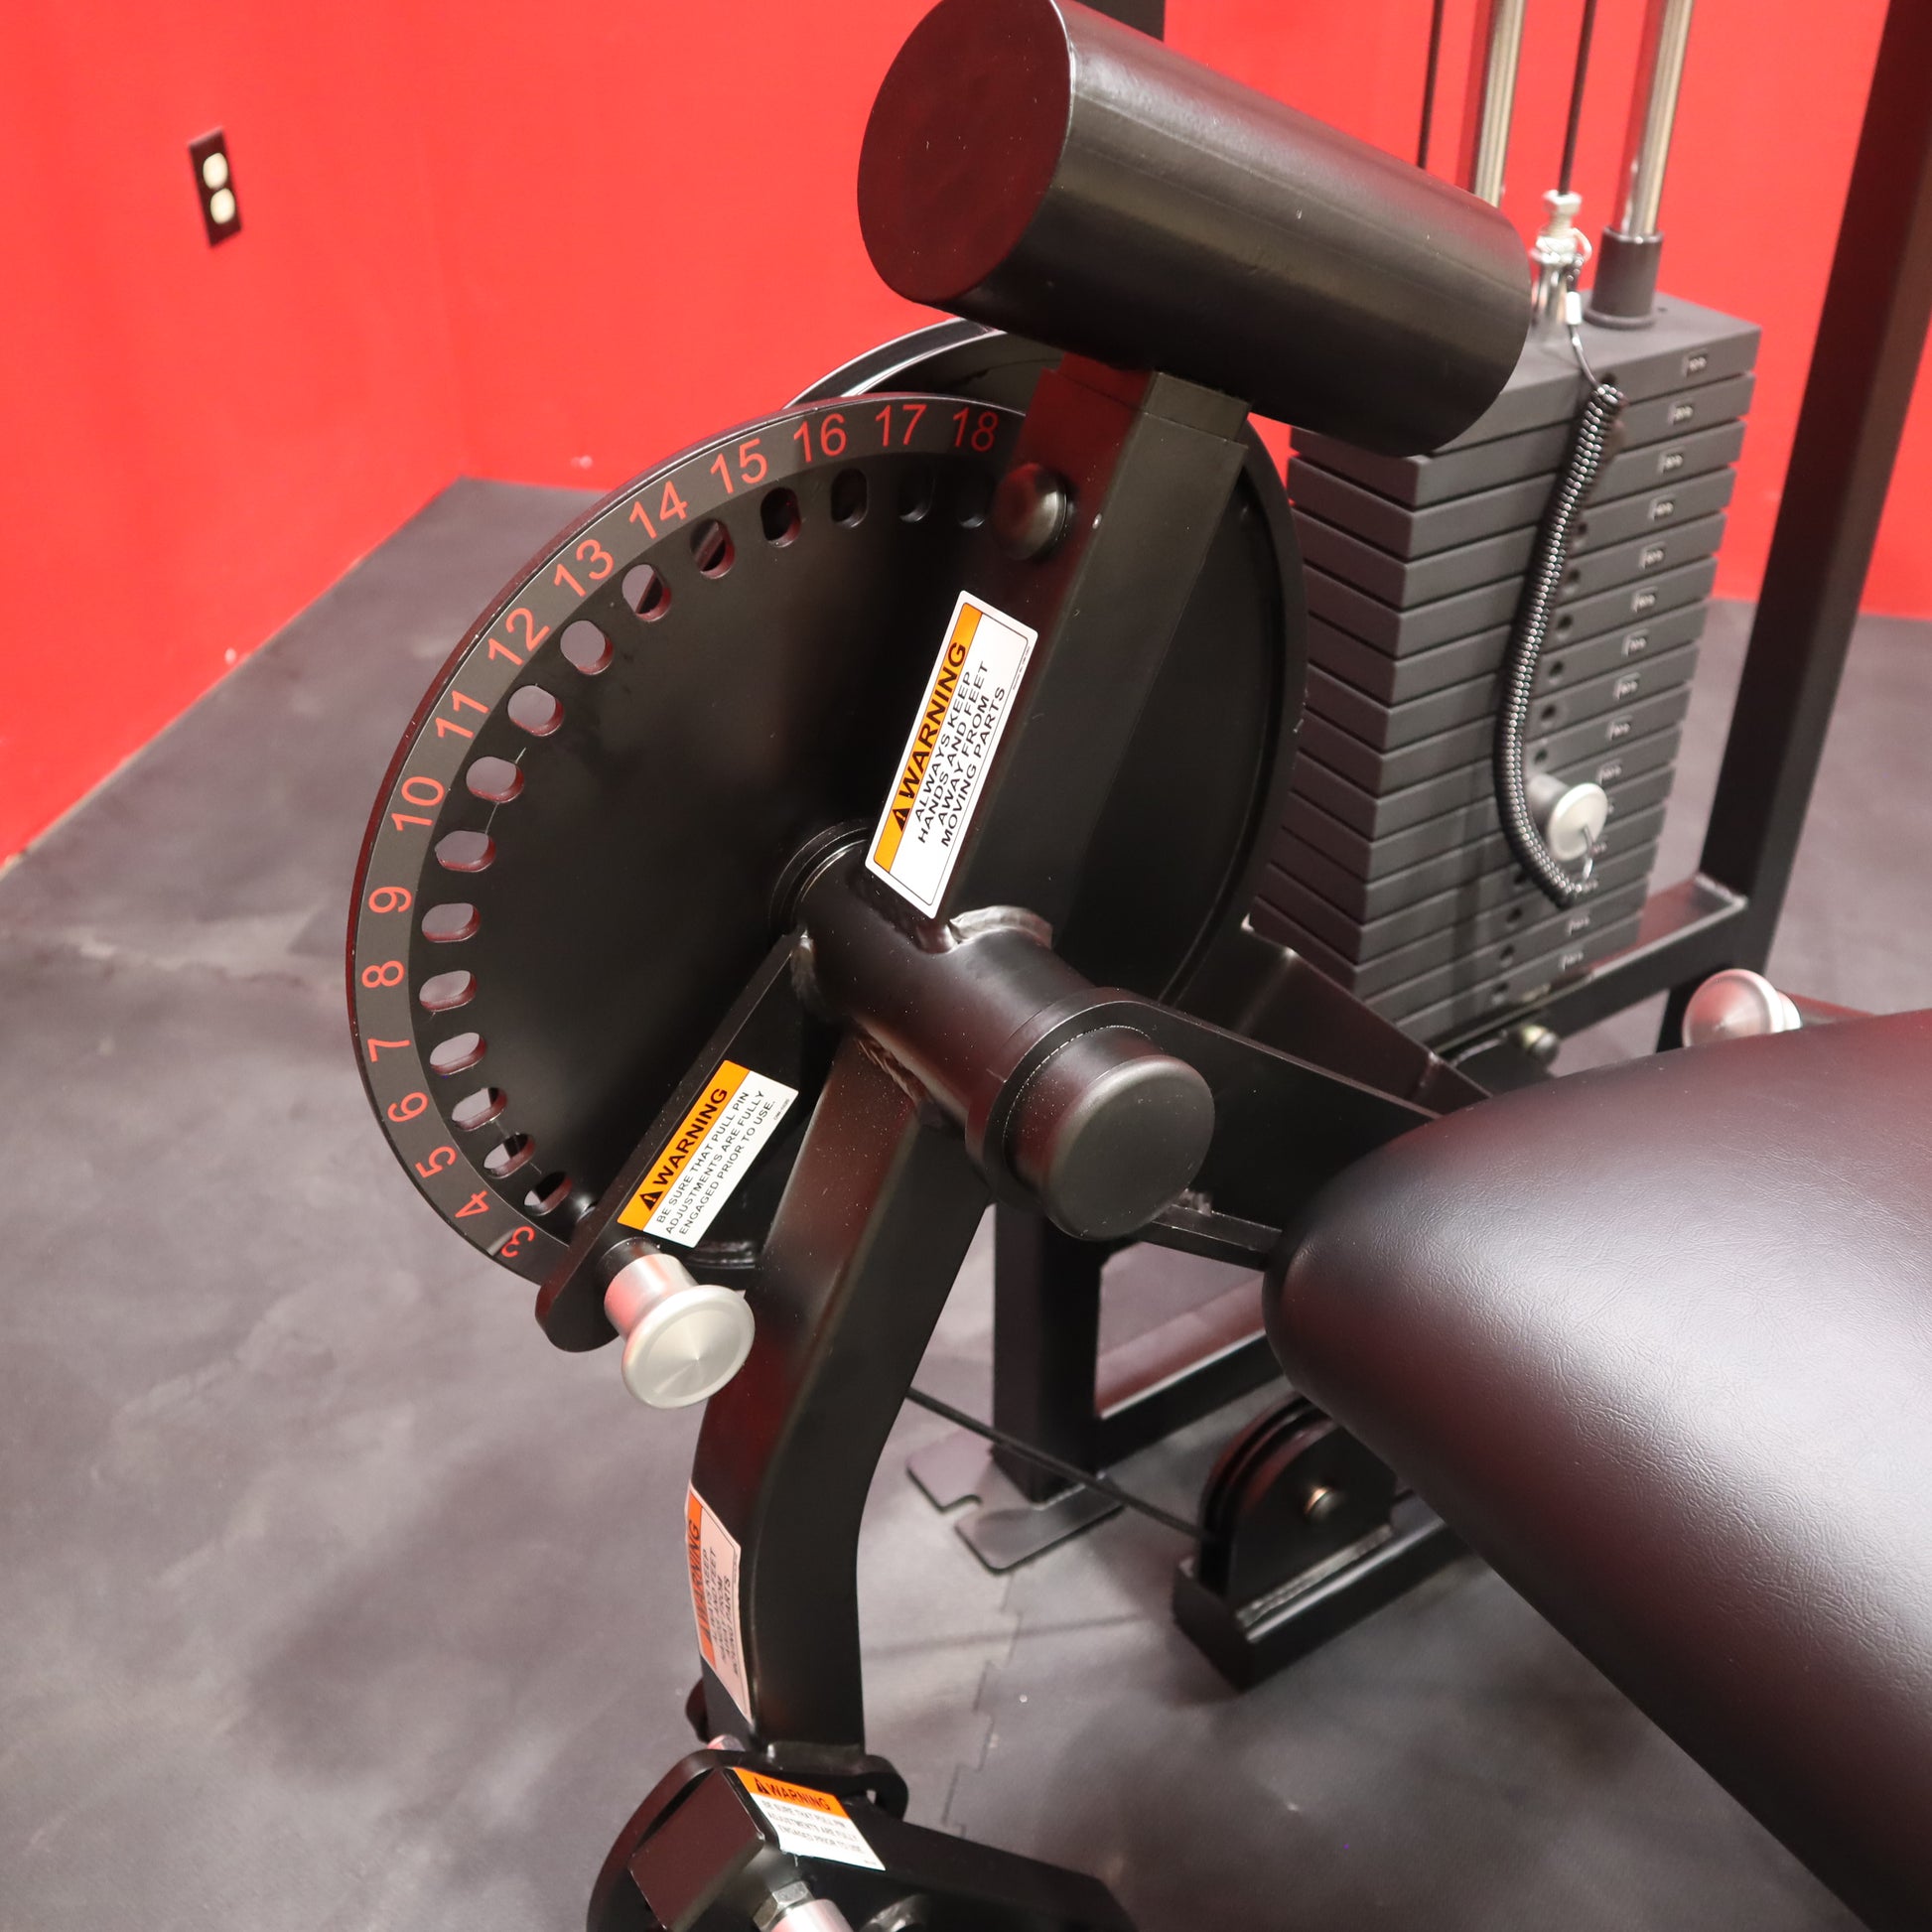 Commercial Seated Leg Extension Gym Machine (125kg) - Primal Strength